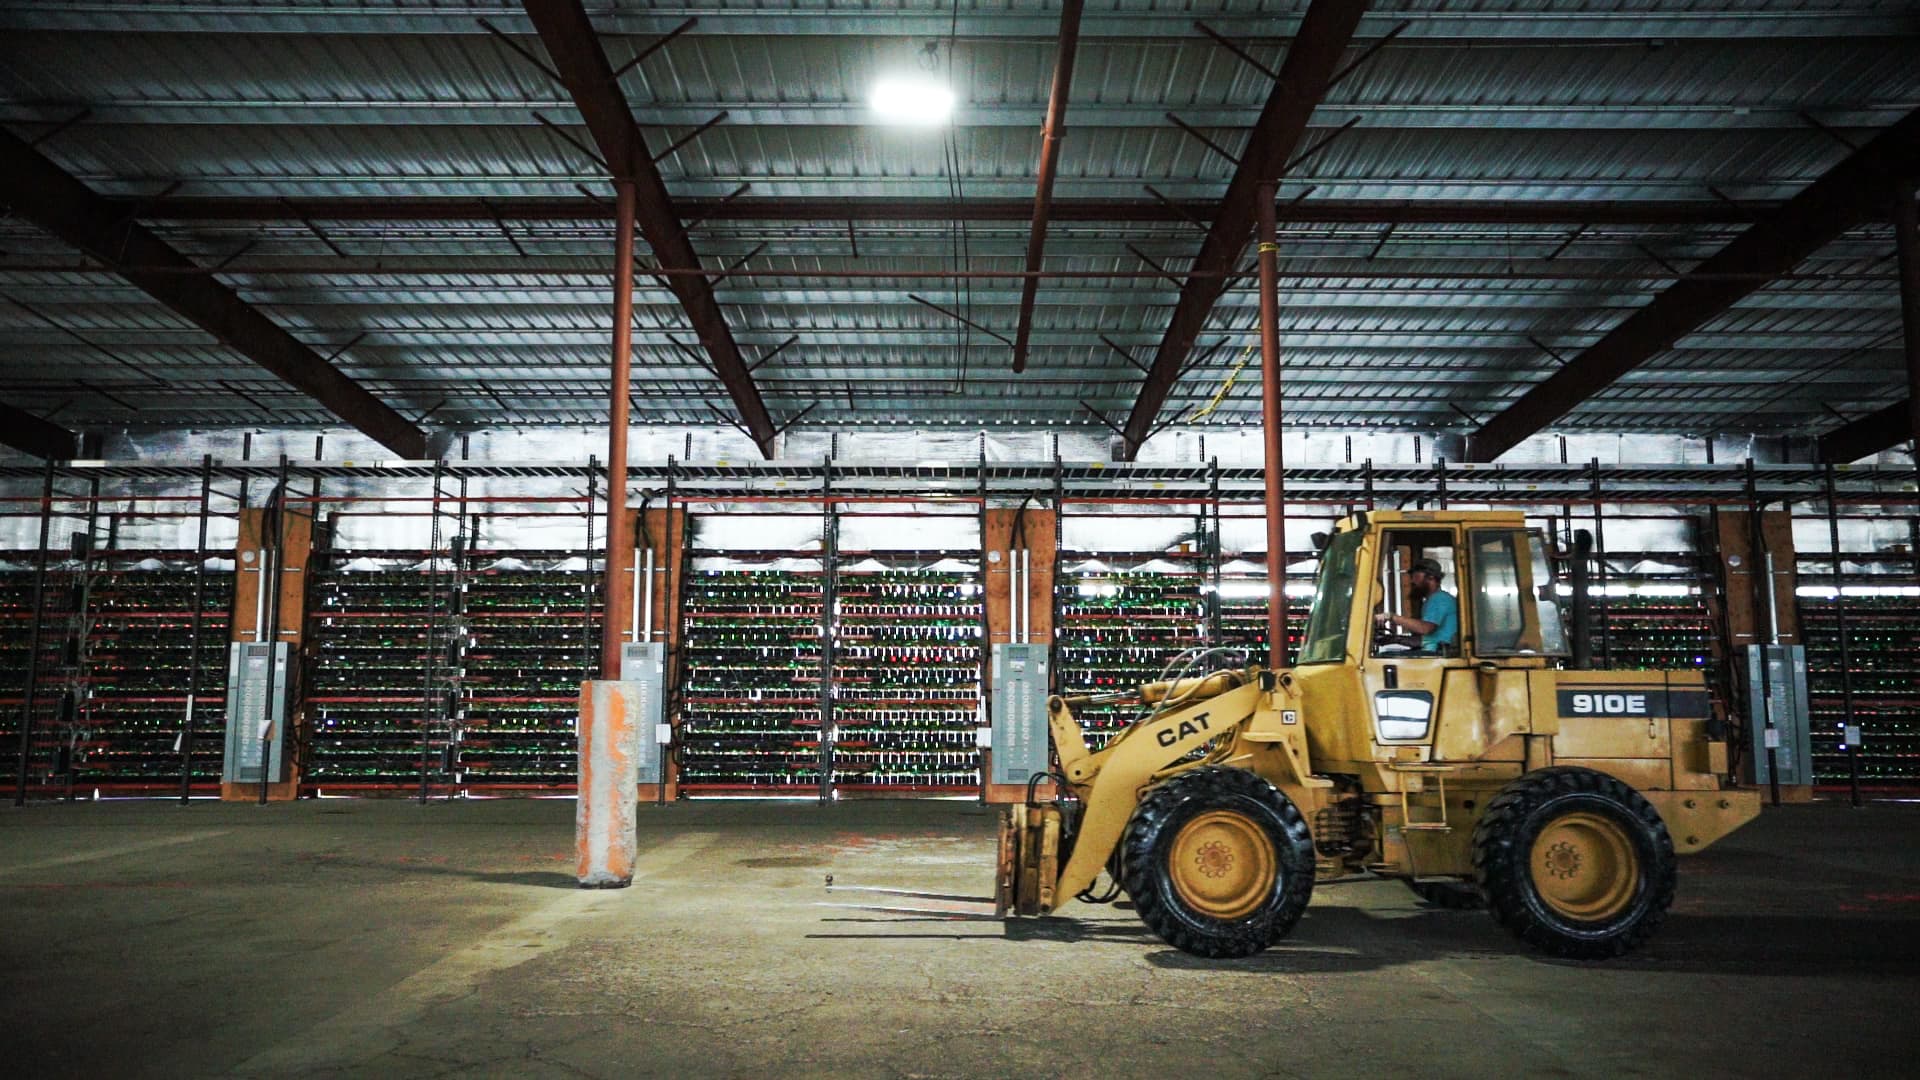 Inside the SCATE Ventures mining farm in Dallesport, Washington.